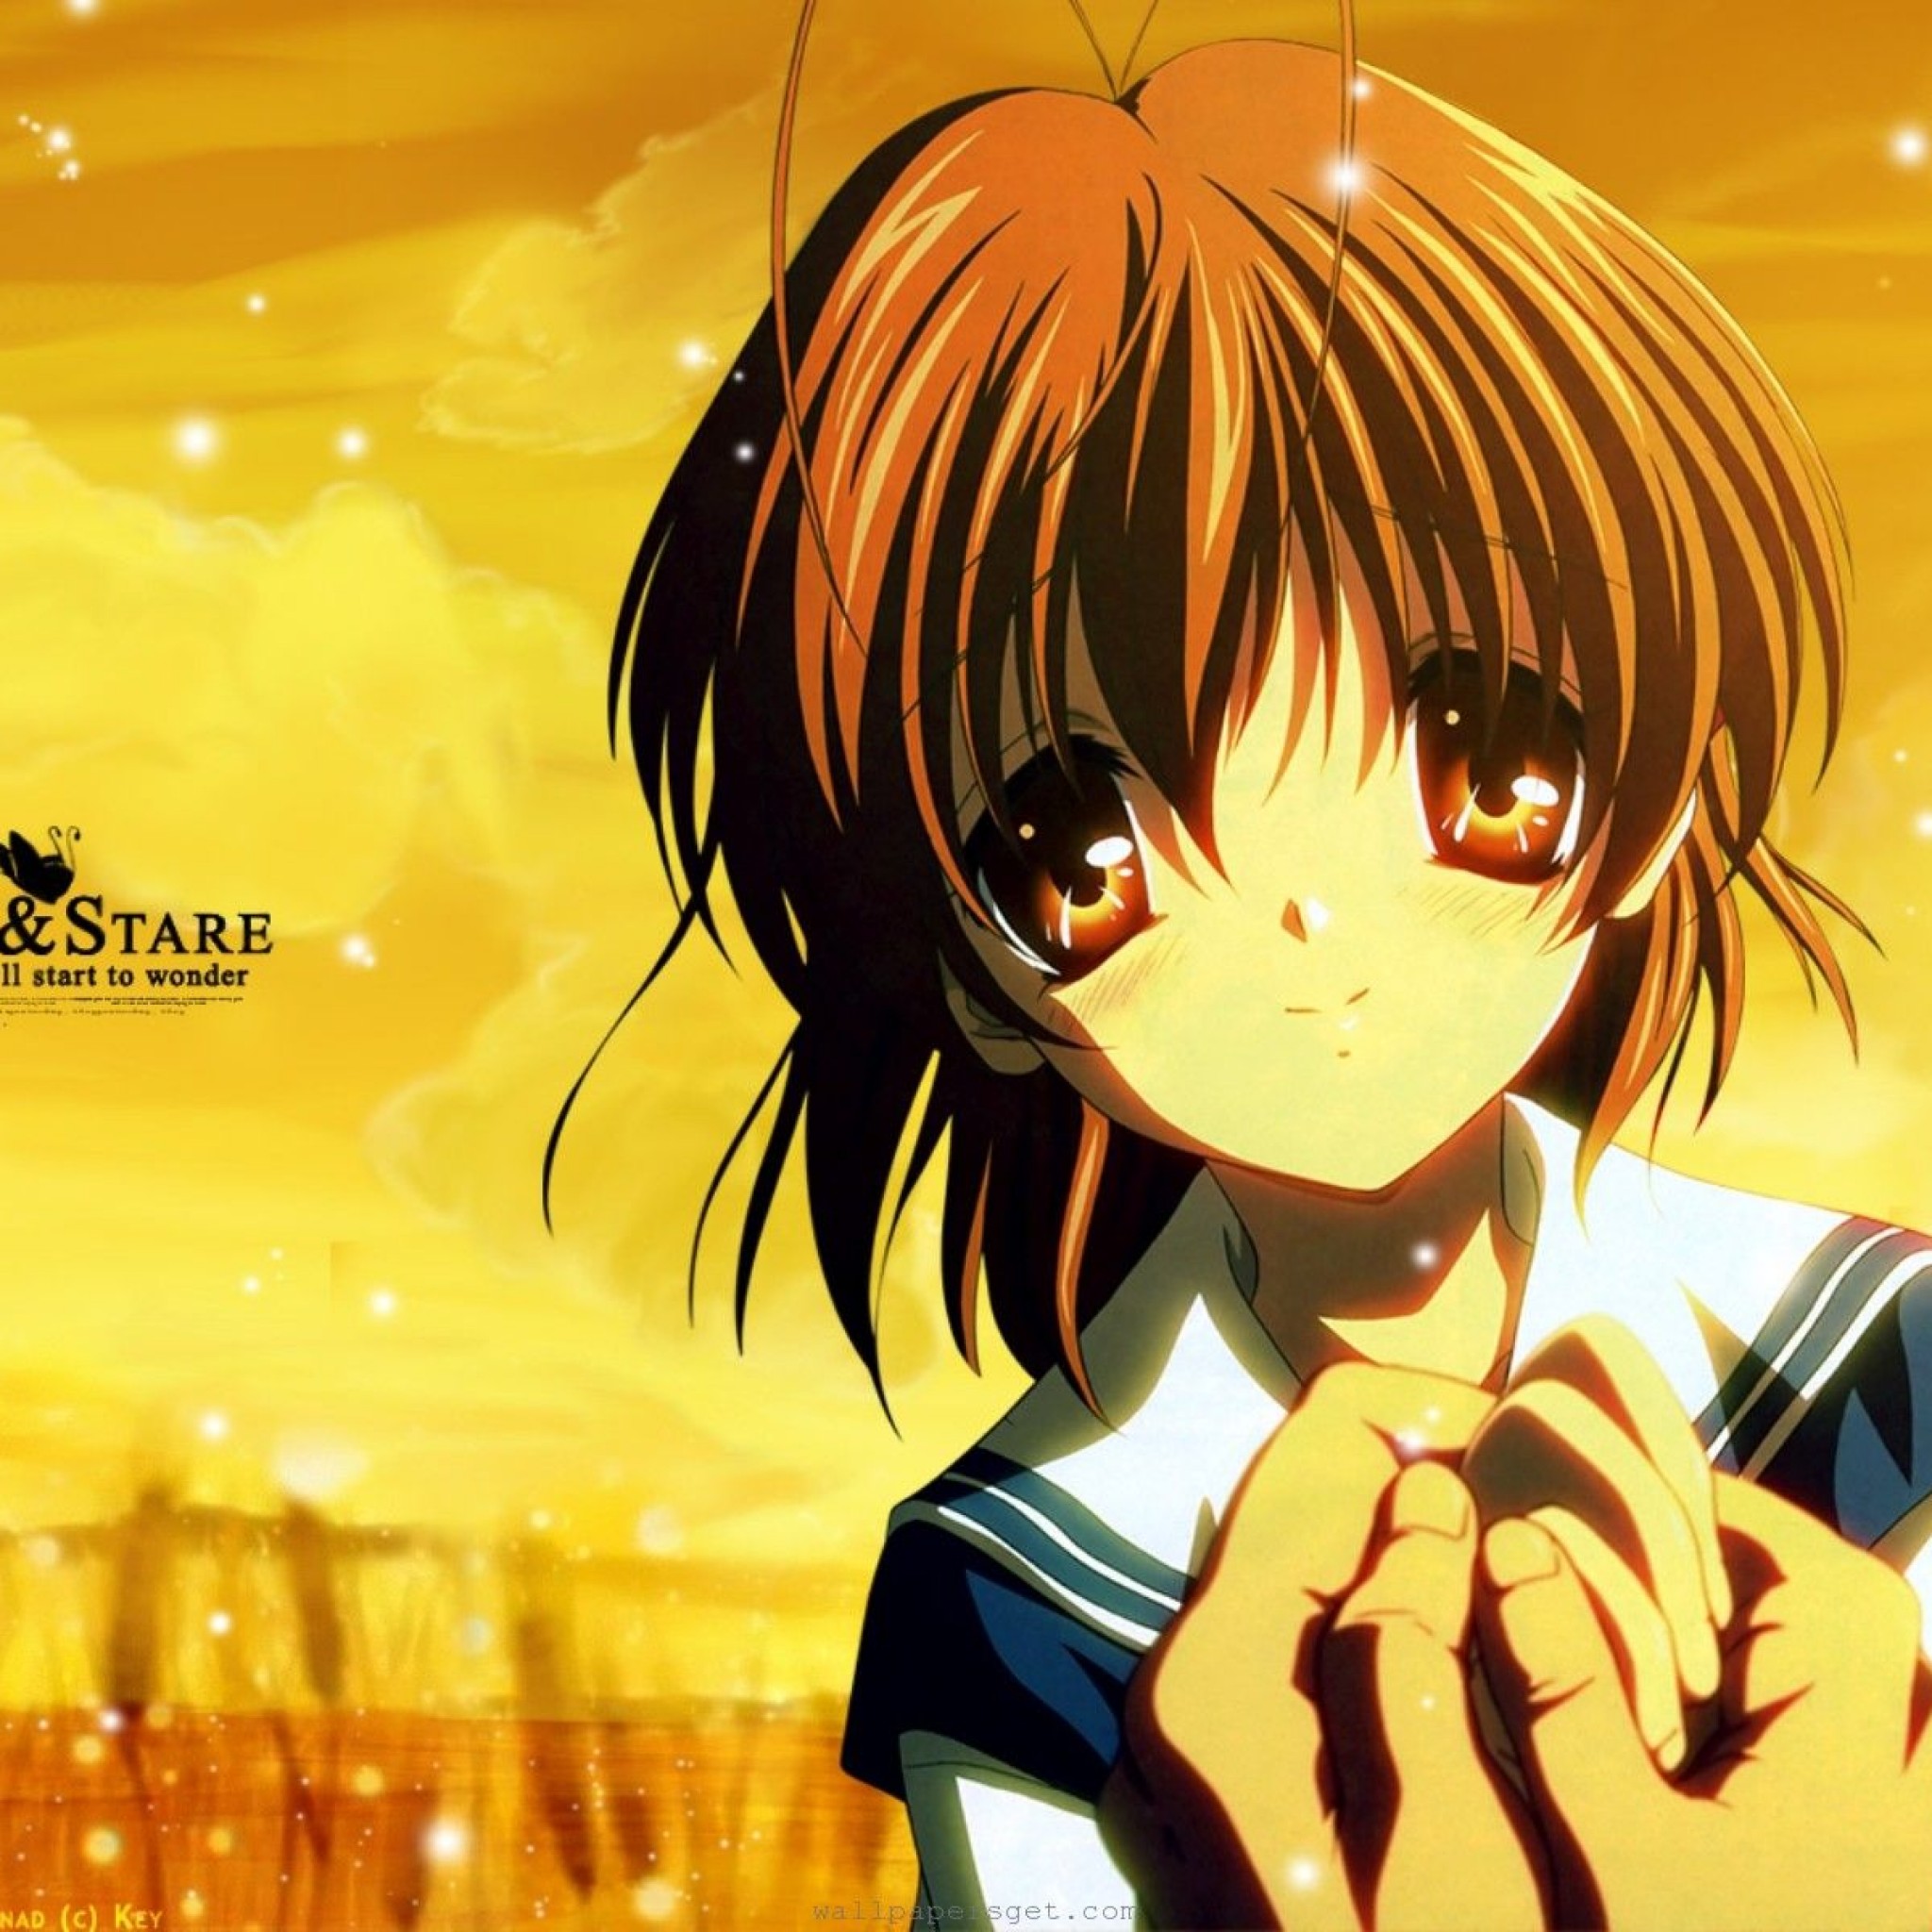 Anime Wallpaper Clannad Clannad Free Wallpapers Ipad タブレット壁紙ギャラリー